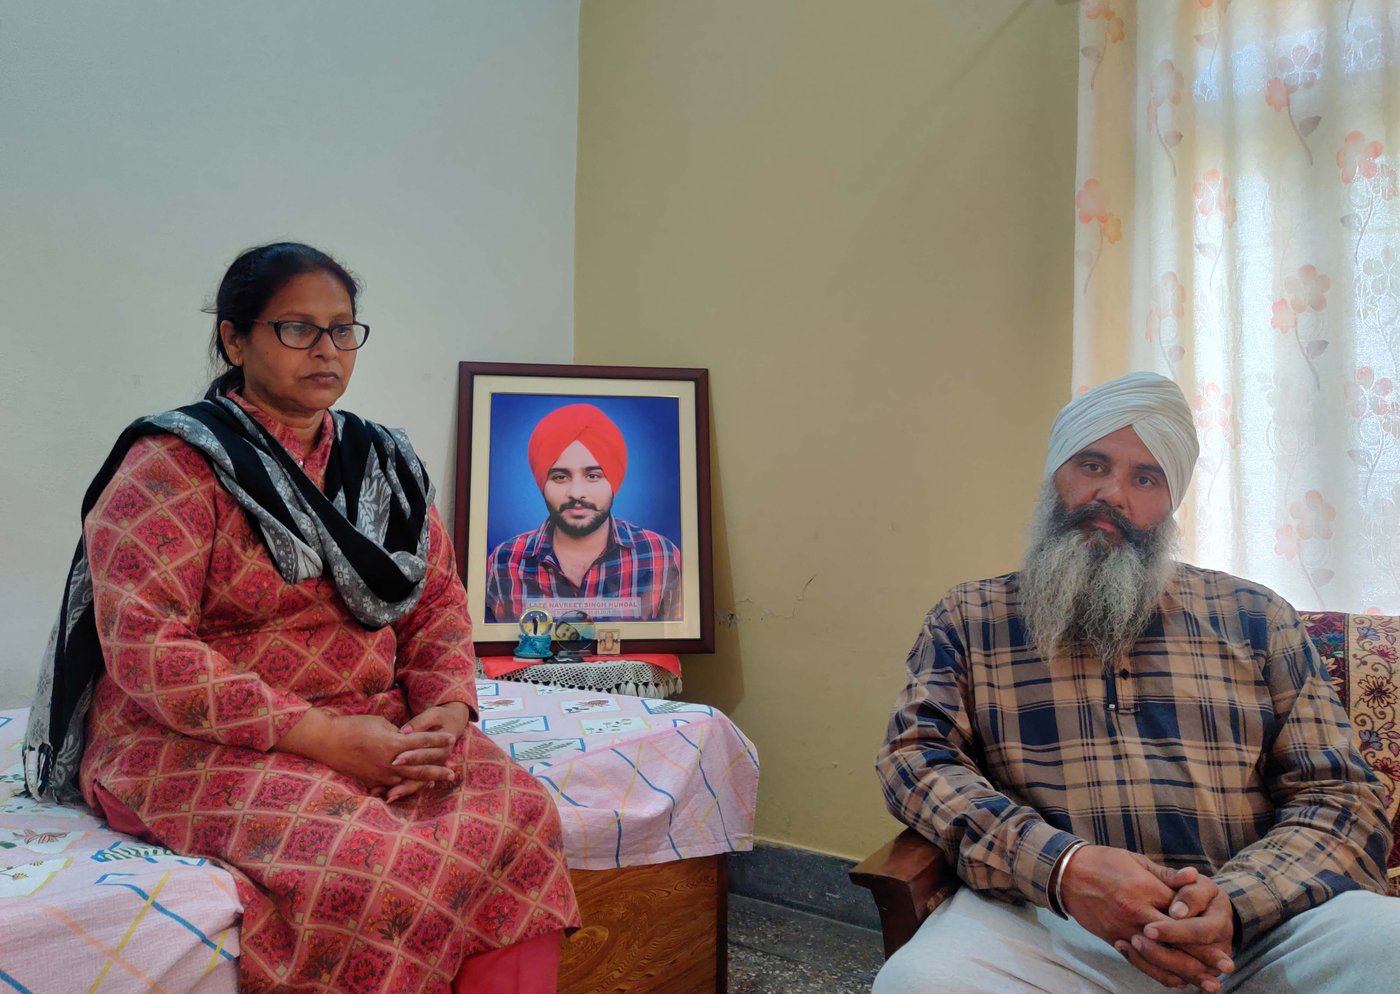 The death of their son, Navreet Singh (in the framed photo), has left a void in Paramjeet Kaur (left) and Sirvikramjeet Singh Hundal's lives.